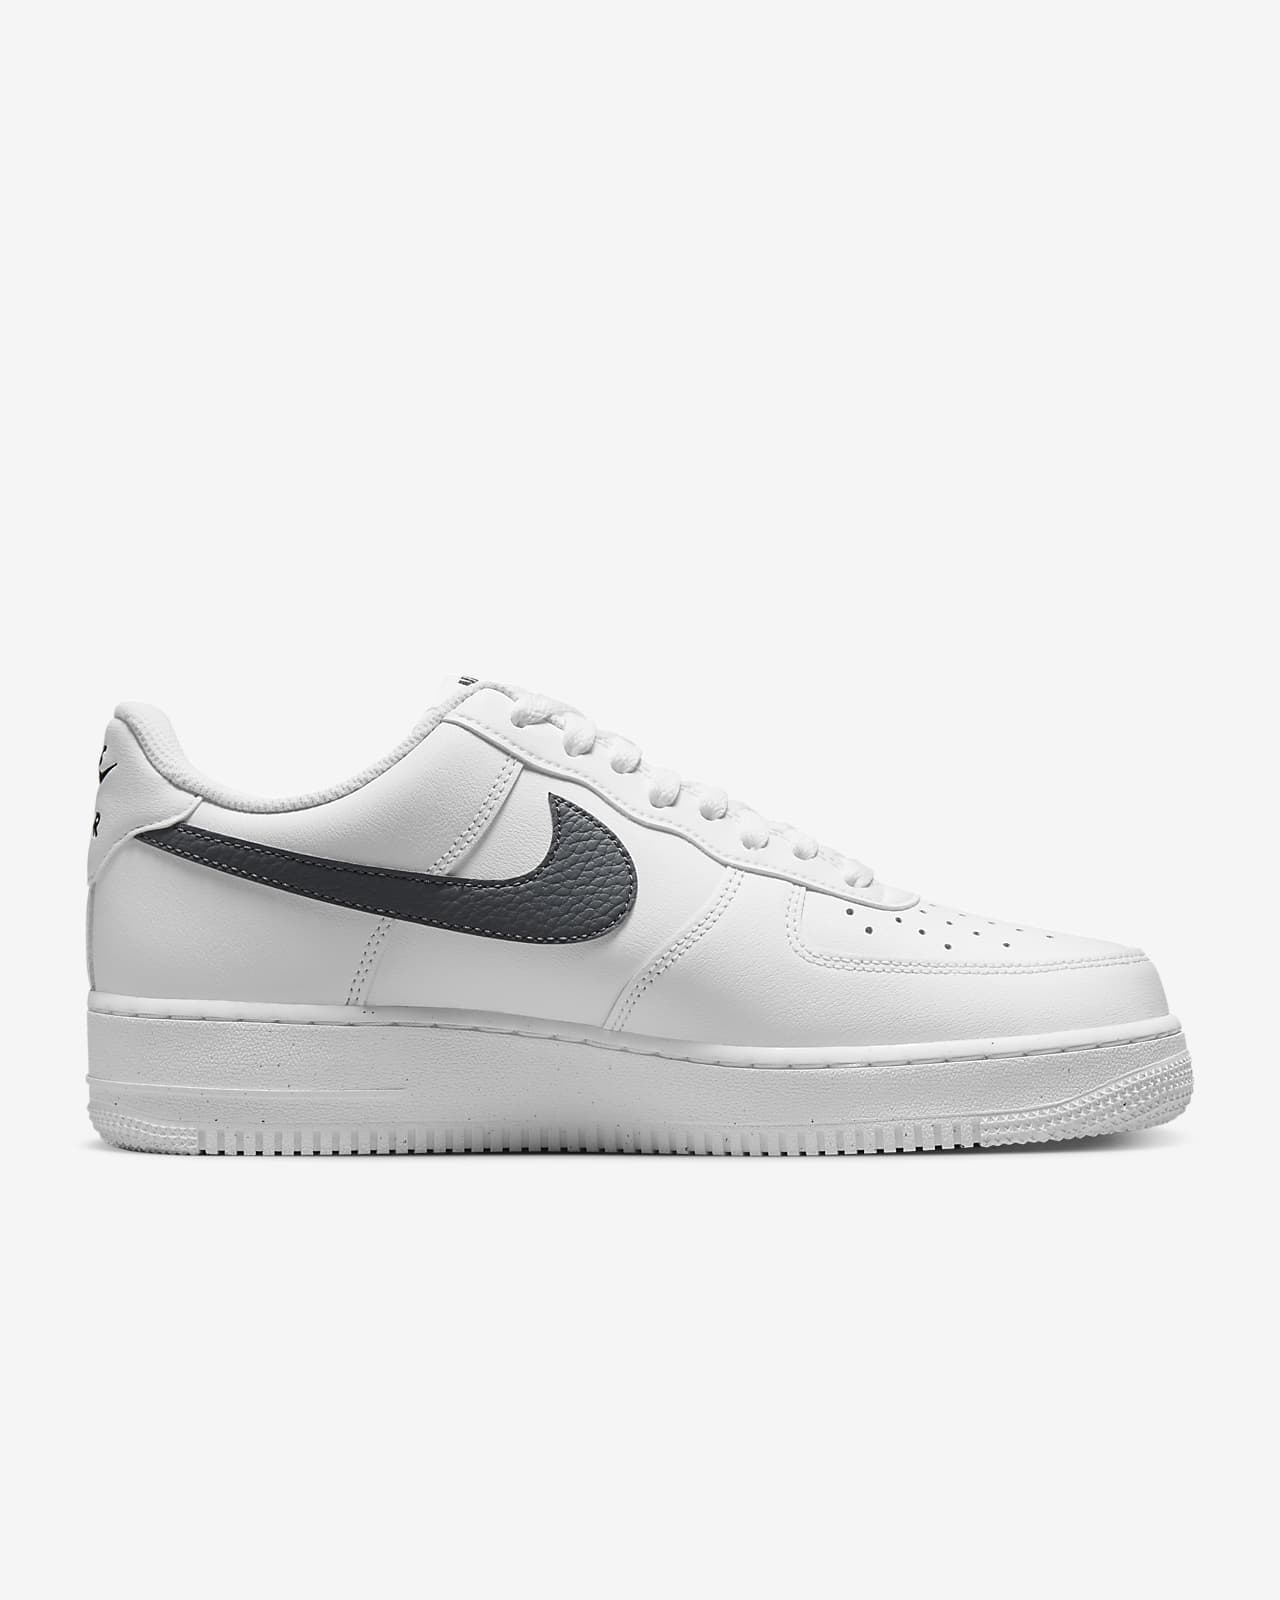 Nike Air Force 1 '07 sneakers in white and black